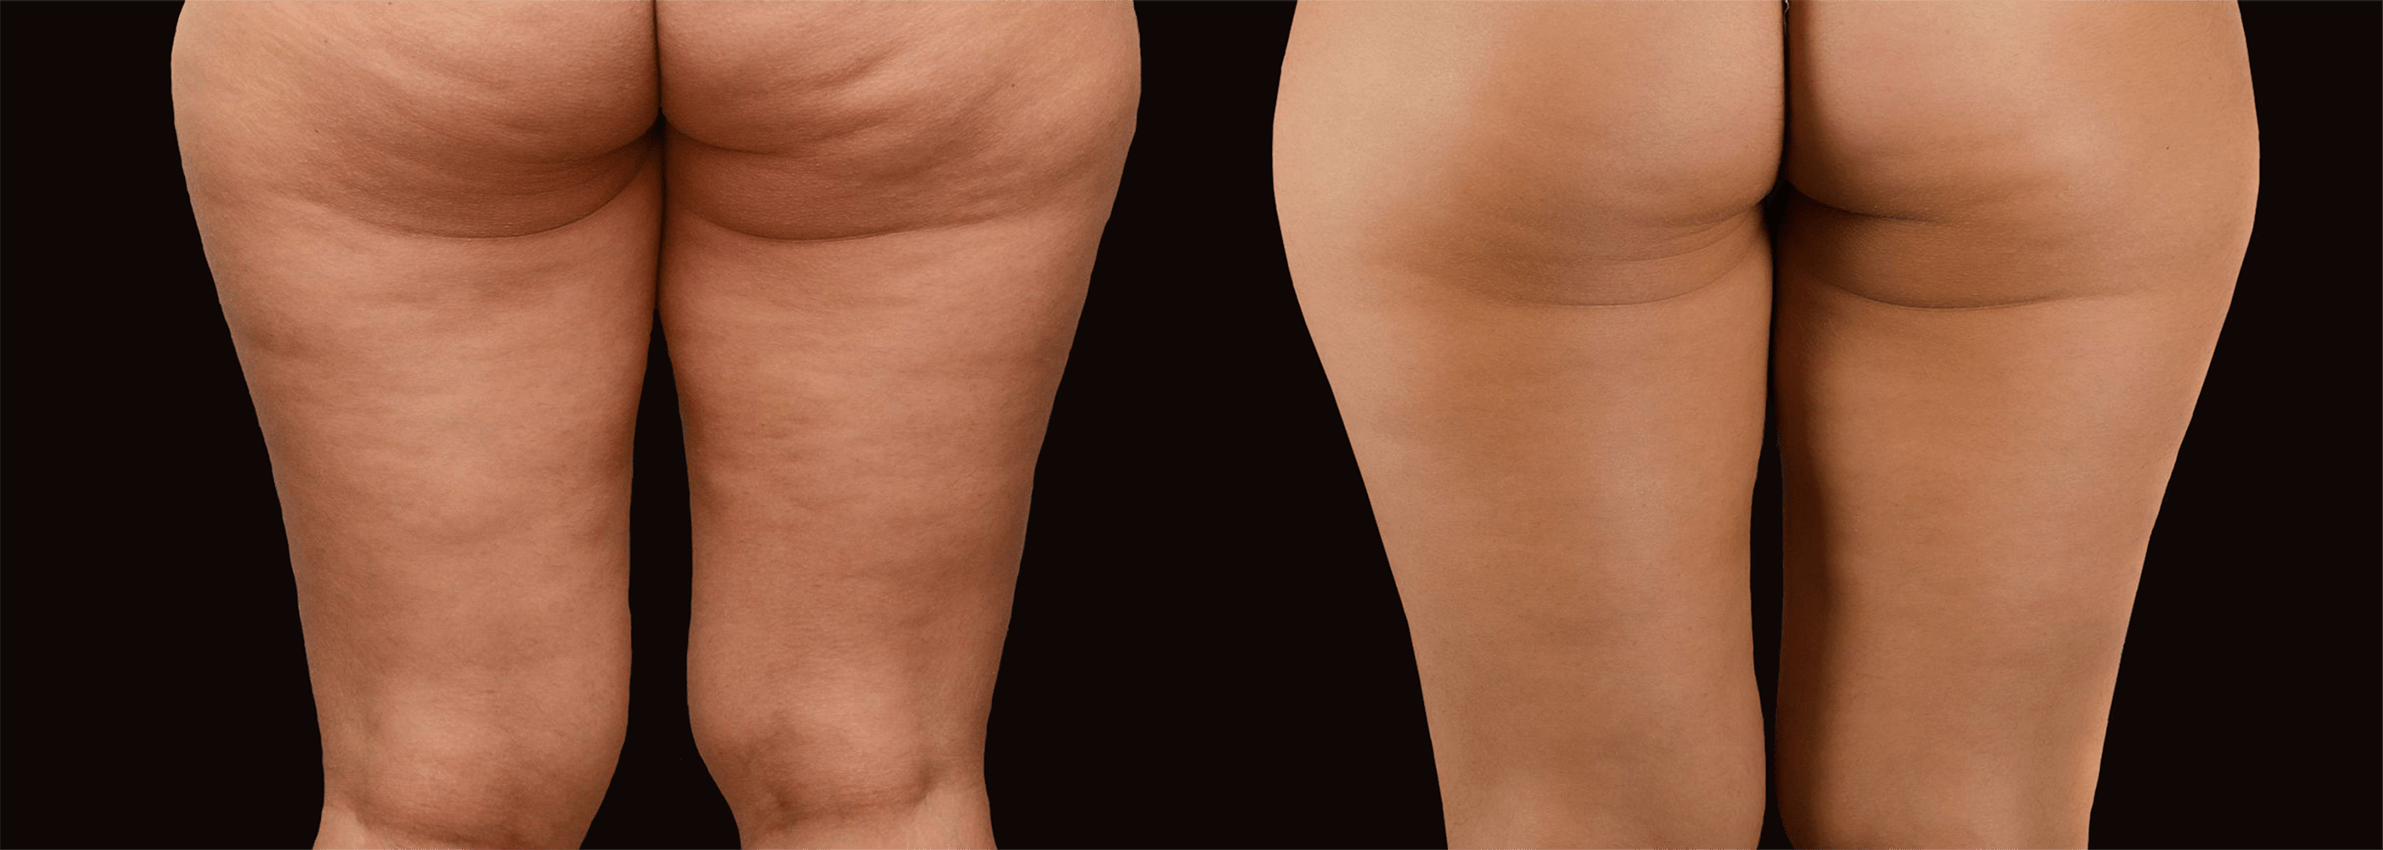 Long Island cellulite removal before after